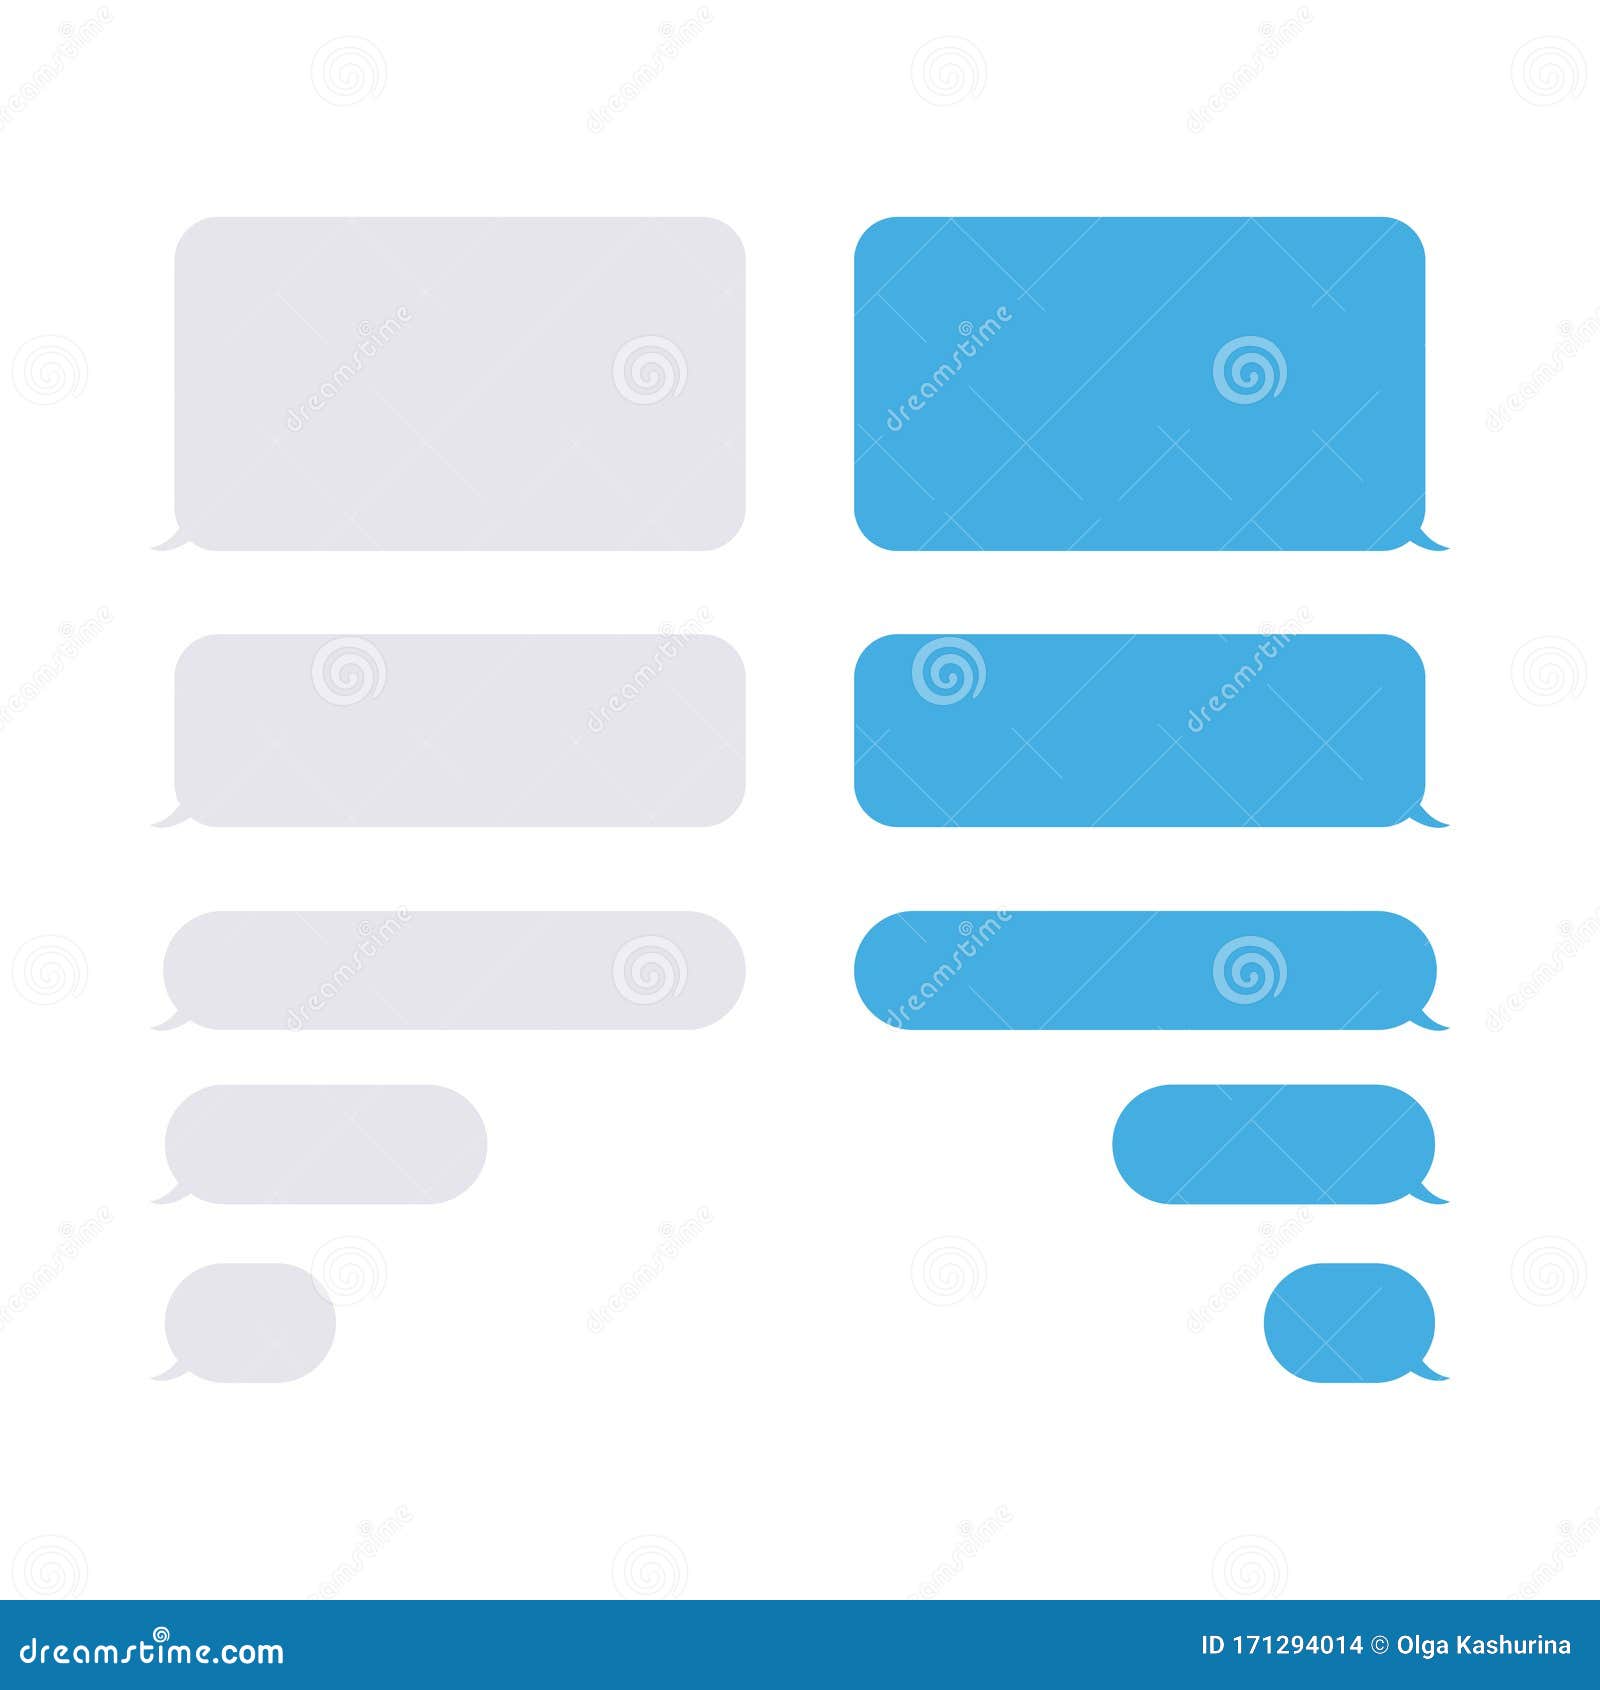 7,484,100+ Message Icon Vector Stock Illustrations, Royalty-Free